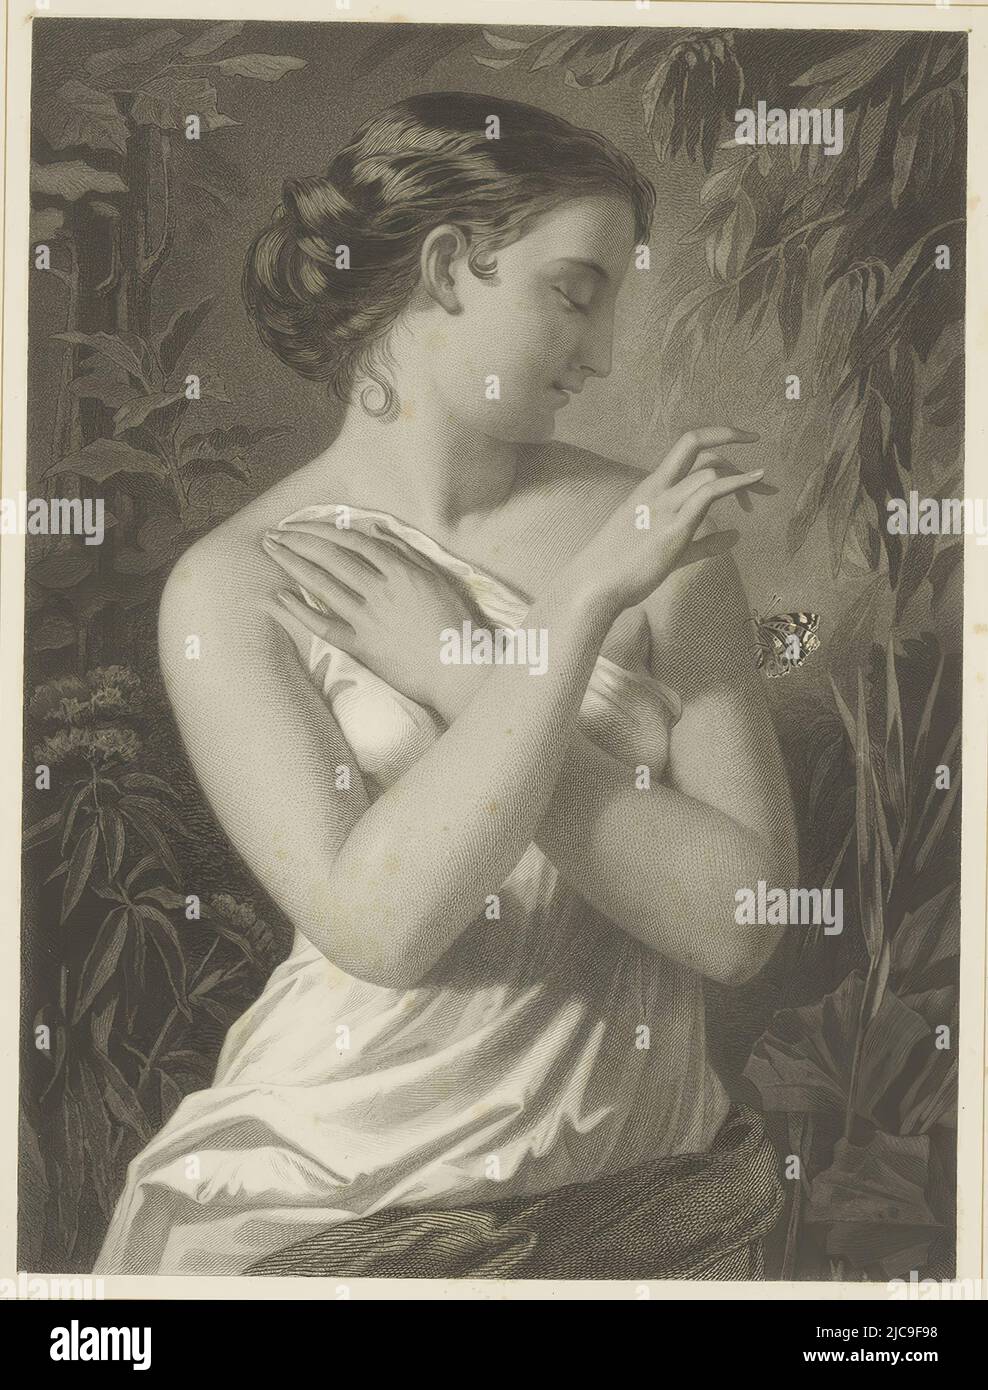 Girl with a butterfly Maedchen mit dem Schmetterling , print maker: Christoph Preisel, (mentioned on object), intermediary draughtsman: Richard L. Lauchert, (mentioned on object), publisher: Piloty & Löhle, (mentioned on object), München, 1850 - 1859, paper, steel engraving, h 437 mm - w 349 mm Stock Photo